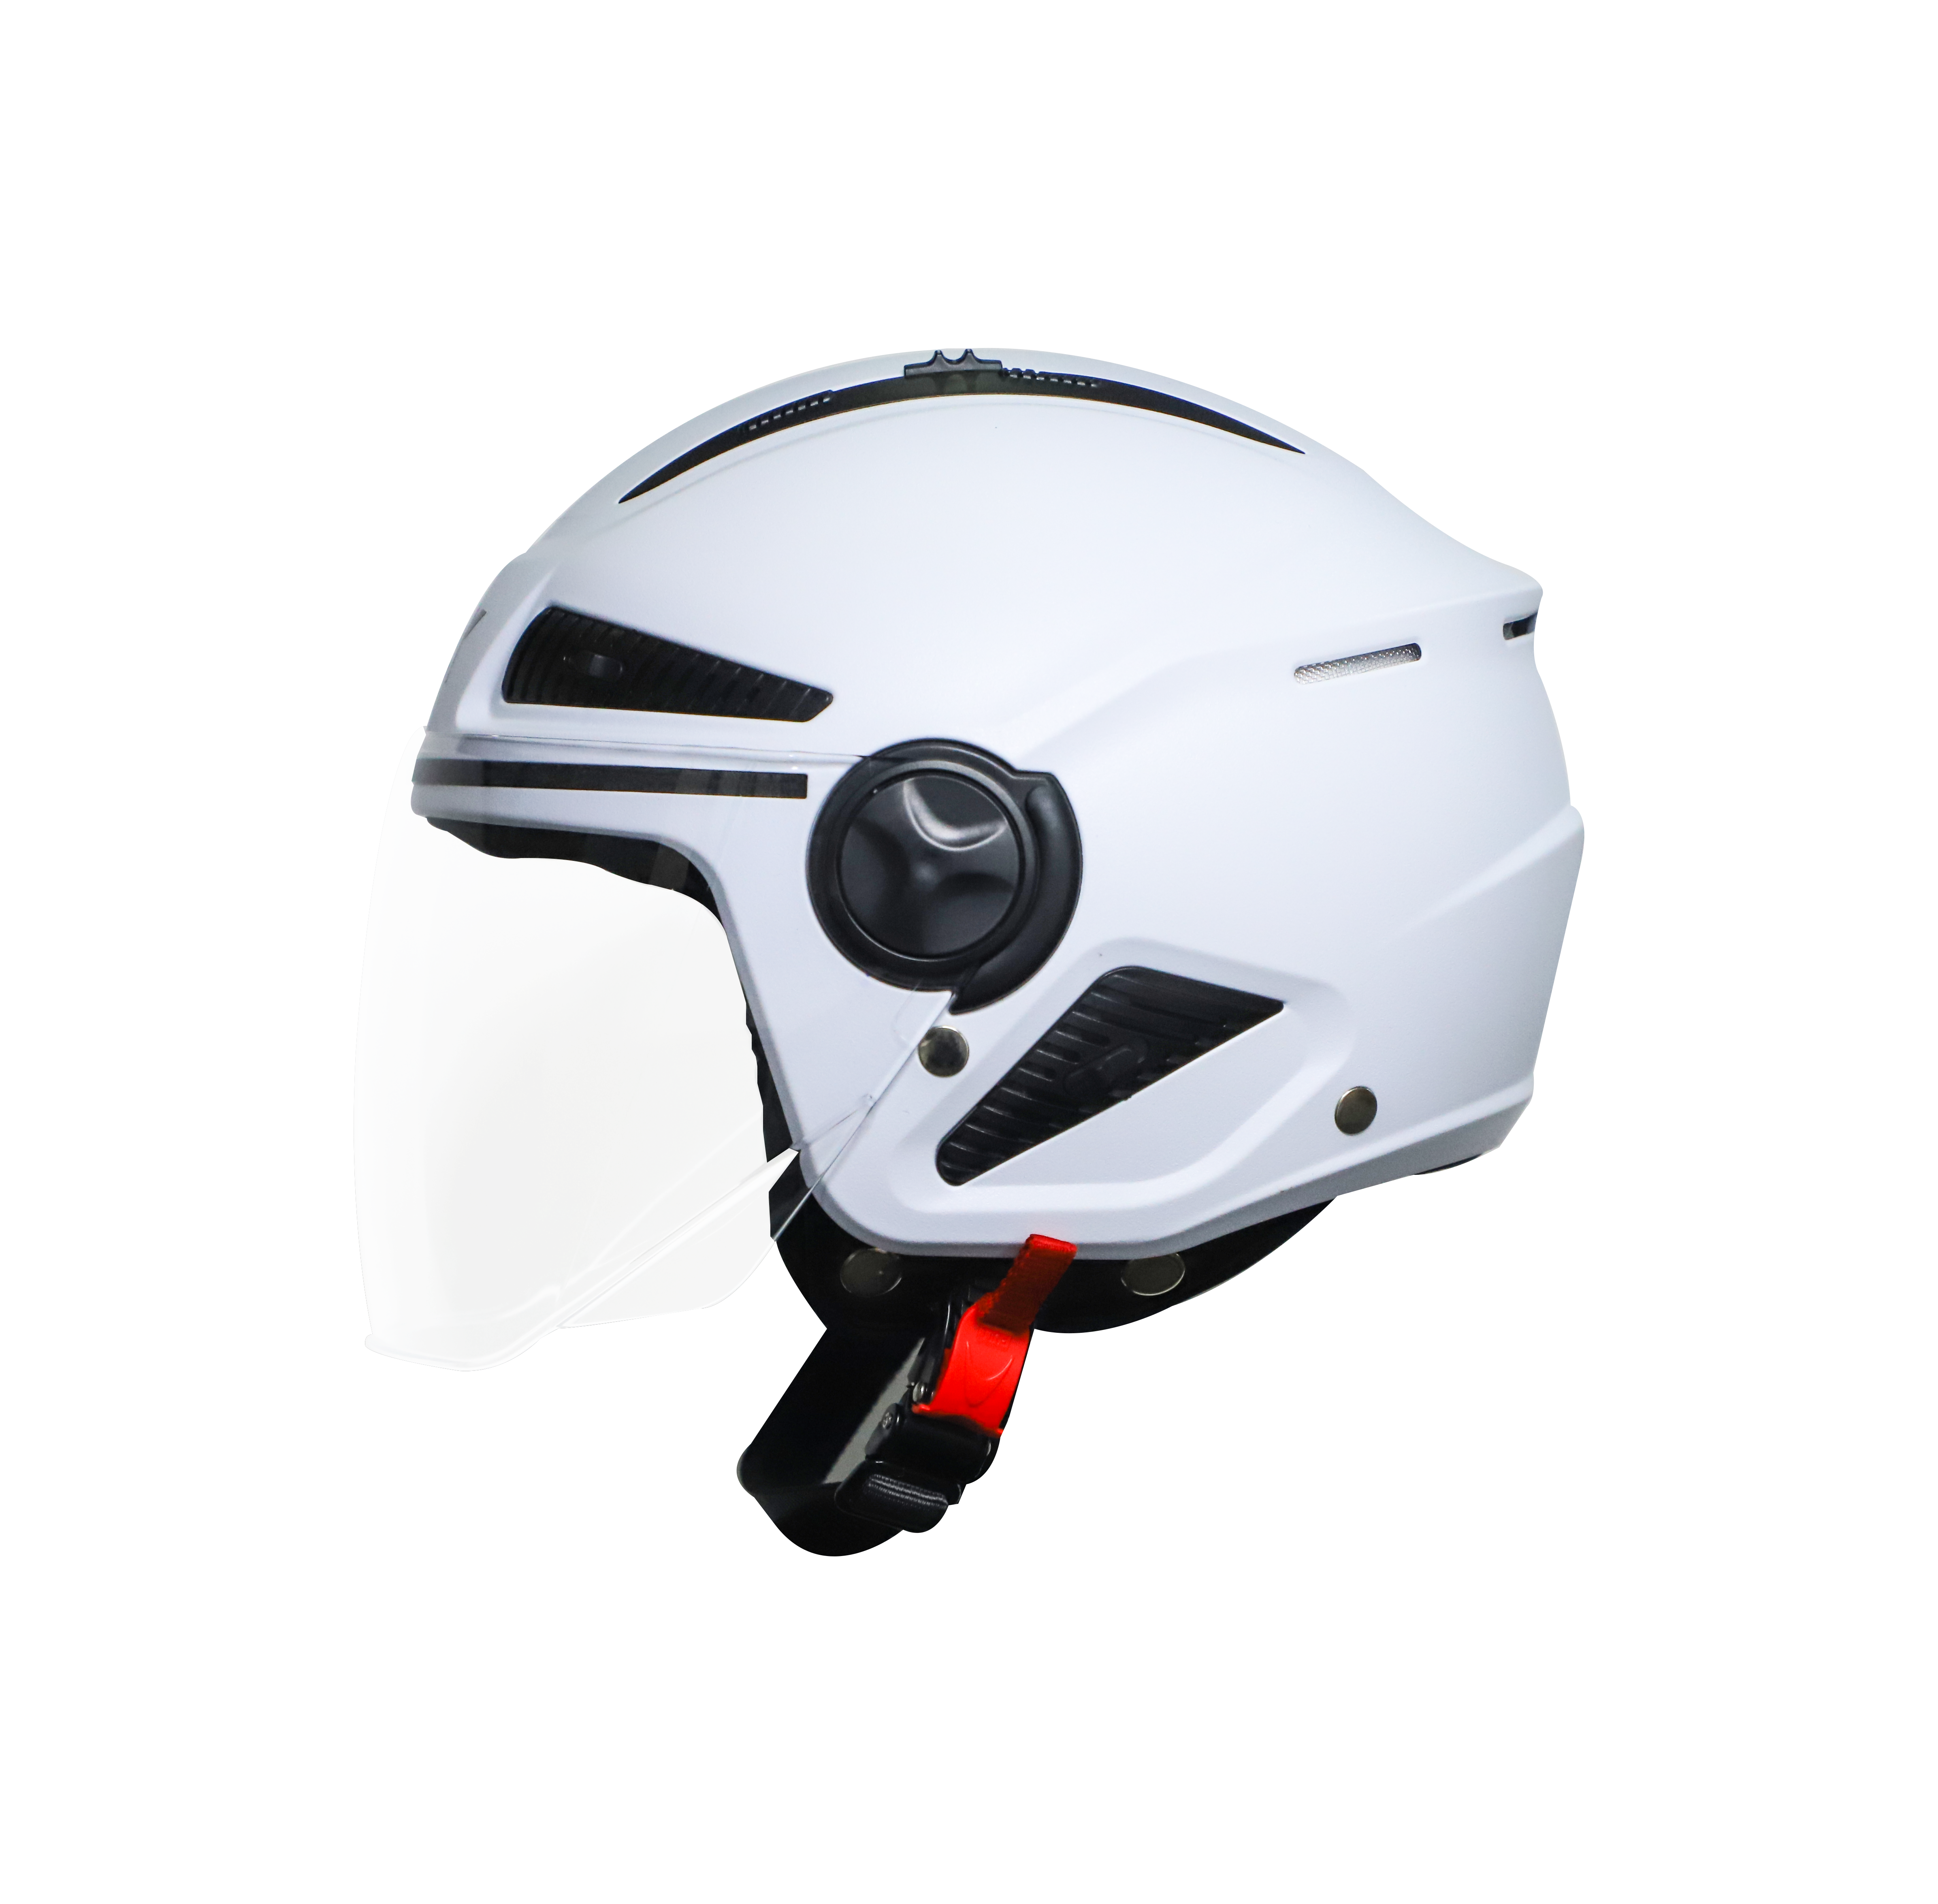 Steelbird SBH-24 Boxx Dashing ISI Certified Open Face Helmet For Men And Women (White With Clear Visor)